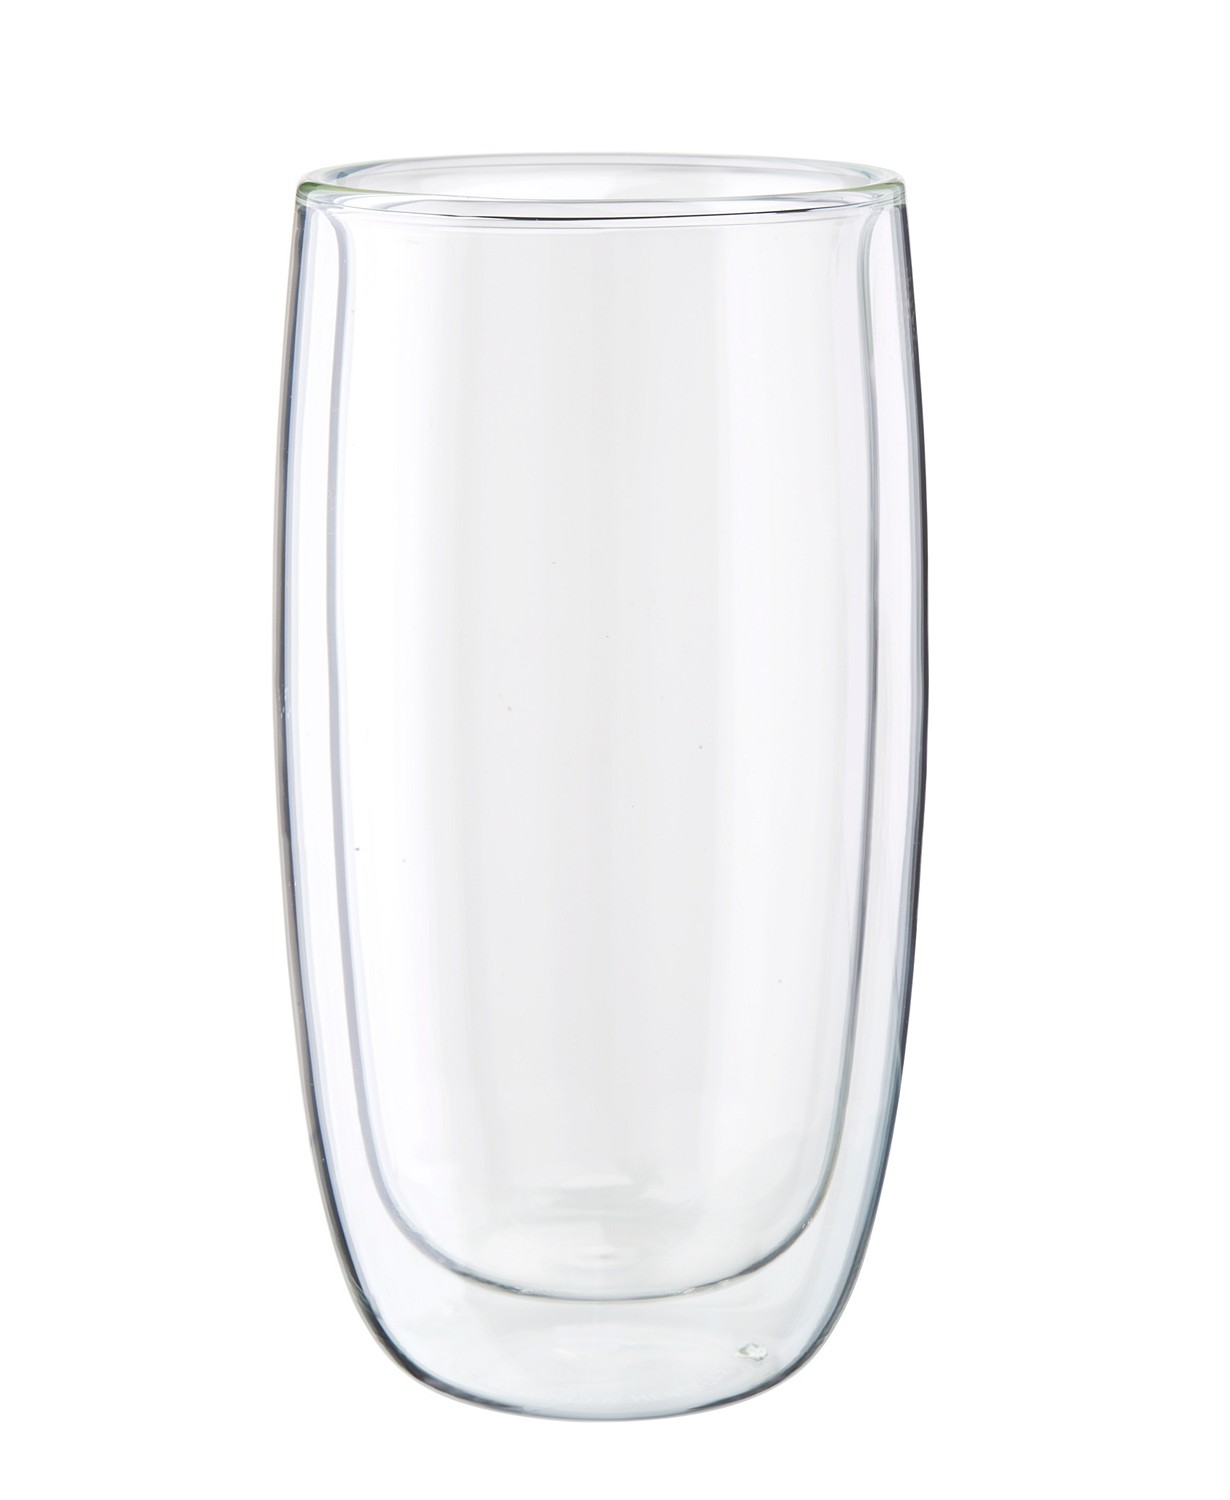 Zwilling Double Wall Glass Bowls (9.4oz) - Set of 2 - Sorrento